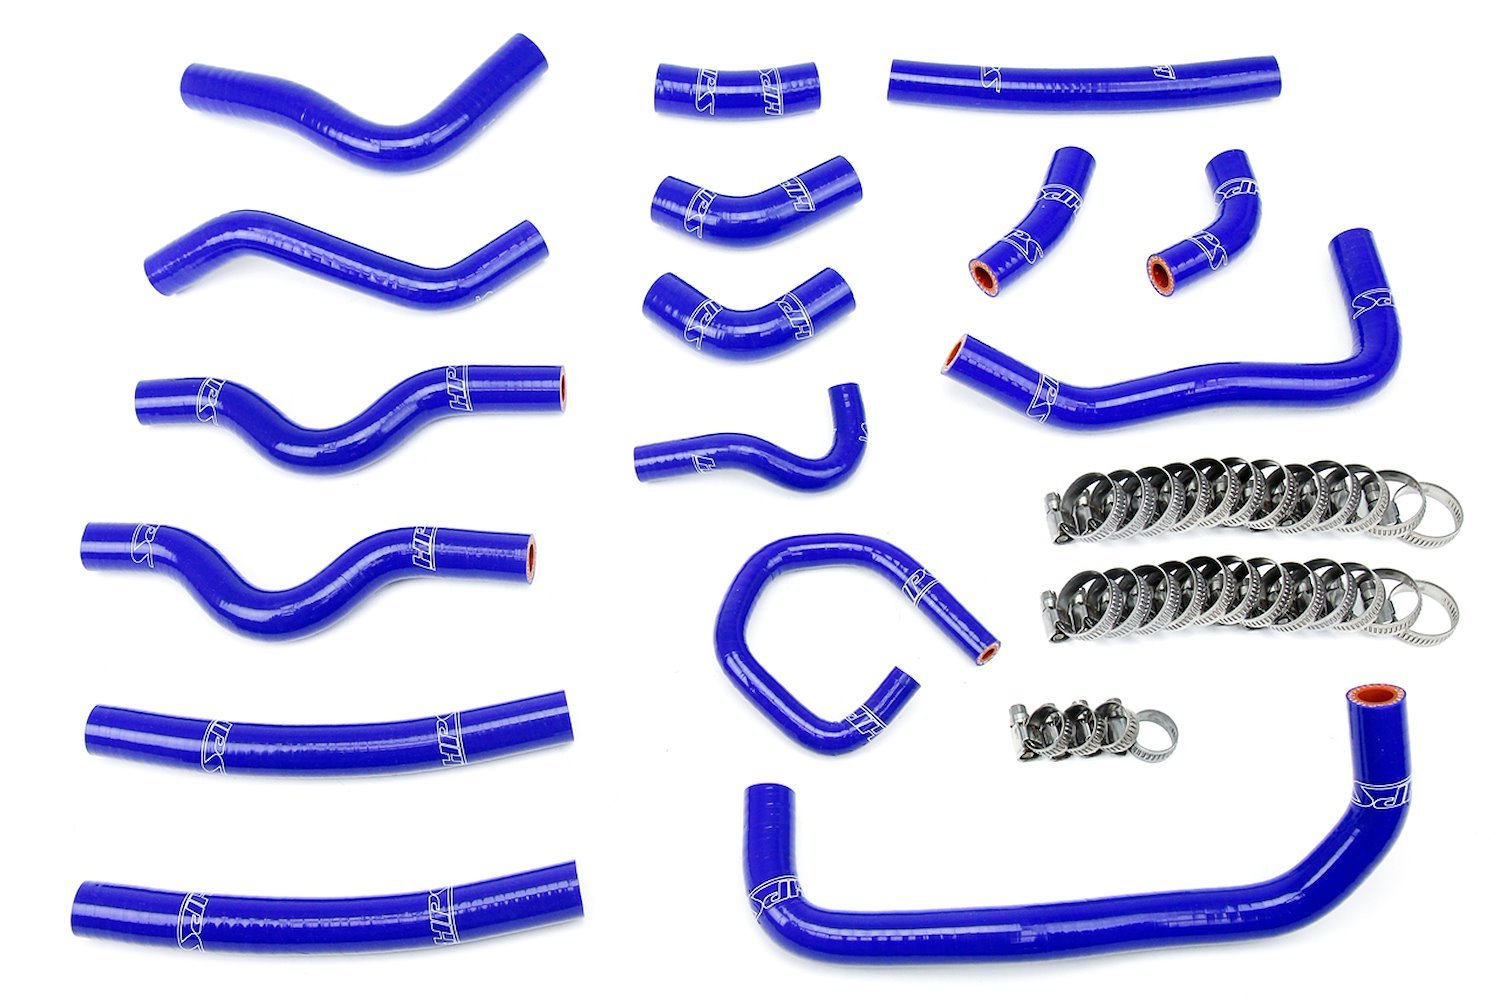 57-1913-BLUE Heater Hose Kit, High-Temp 3-Ply Reinforced Silicone, Replace OEM Rubber Heater Coolant Hoses